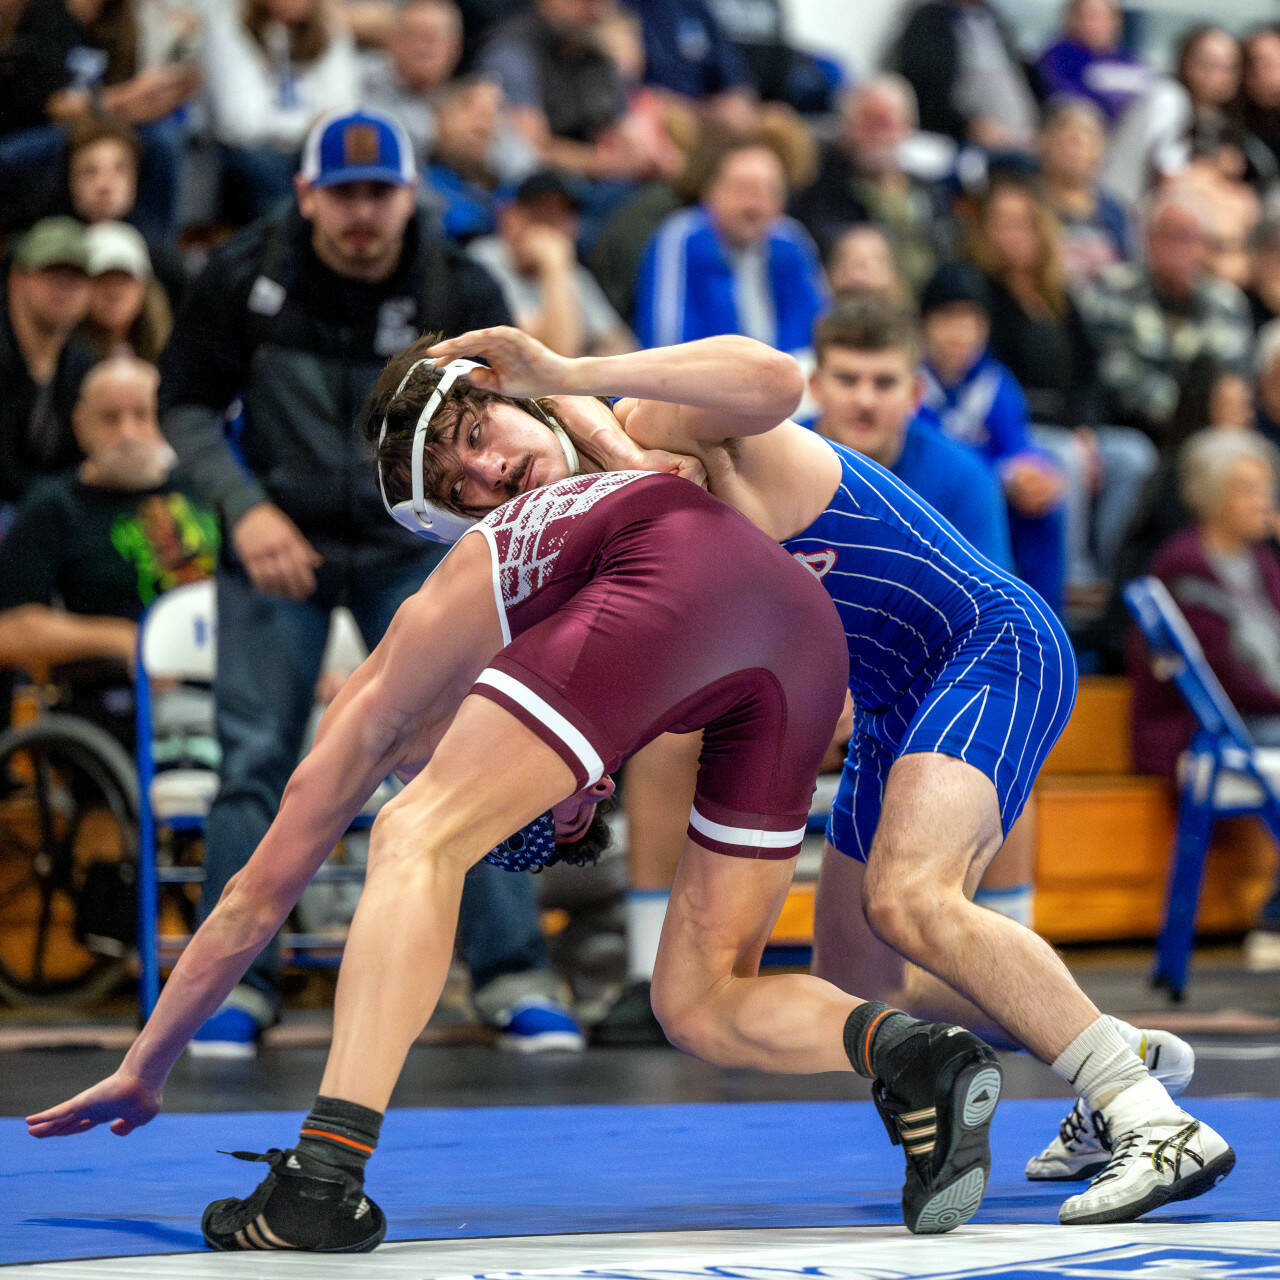 PHOTO BY FOREST WORGUM Elma senior Kale Reeves, right, wrestles with Montesano’s Pablo Moreno in a 126-pound match at the 1A Evergreen Sub-Regionals on Saturday at Elma High School.